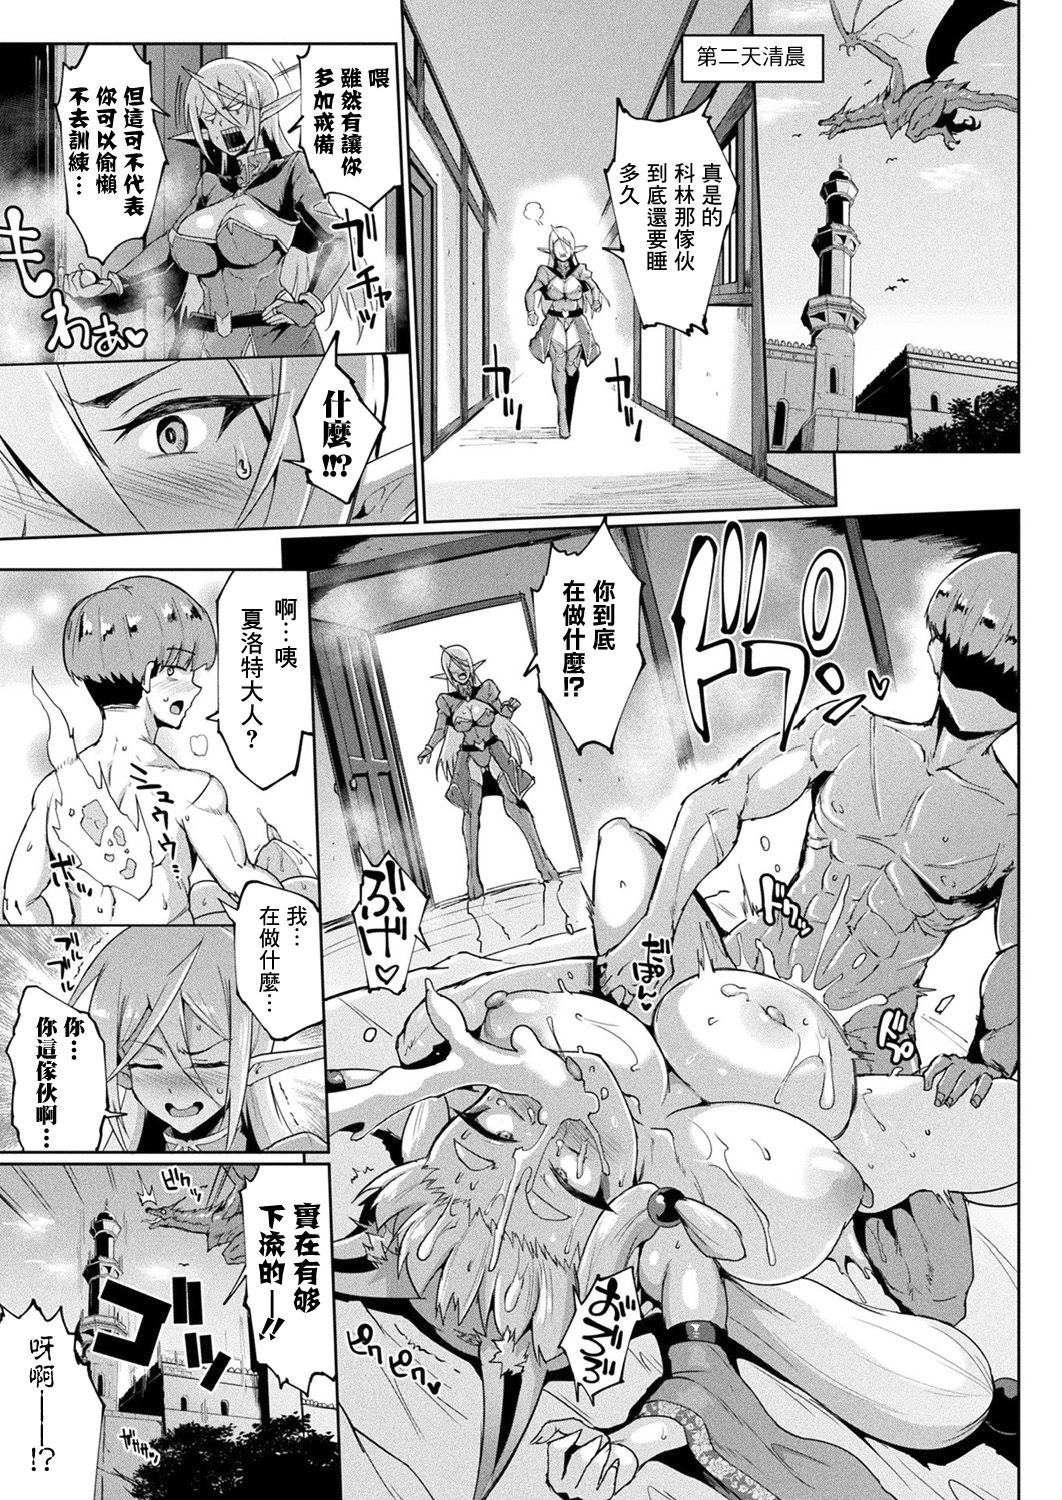 [Fan no hitori] YOUR GRACE, MY MASTER (COMIC Unreal 2019-10 Vol. 81) [Chinese] [鬼畜王汉化组] [Digital] page 26 full